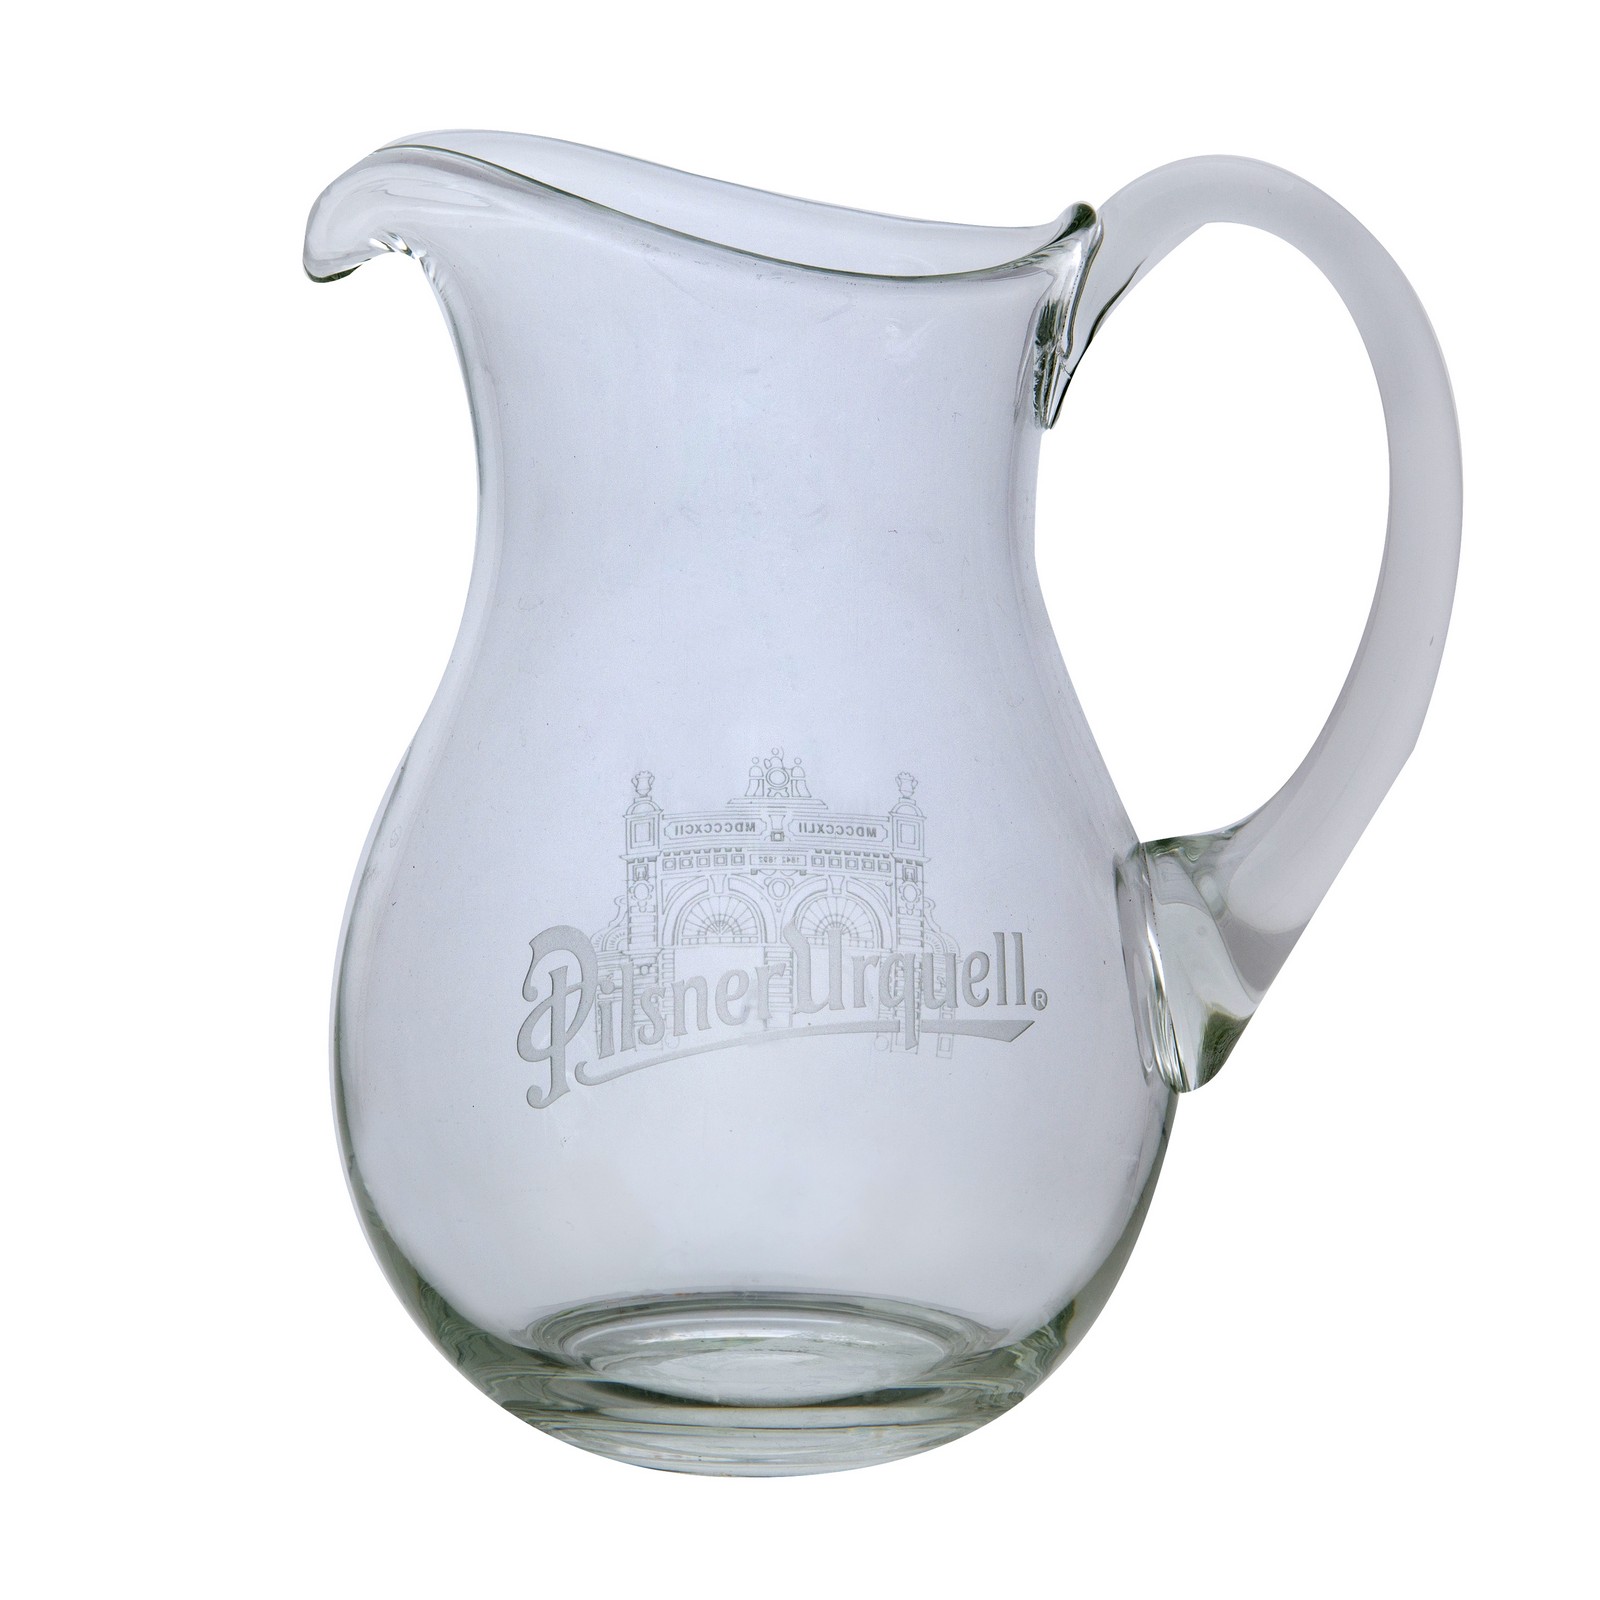 Beer pitcher engraved with the Pilsner Urquell logo - small